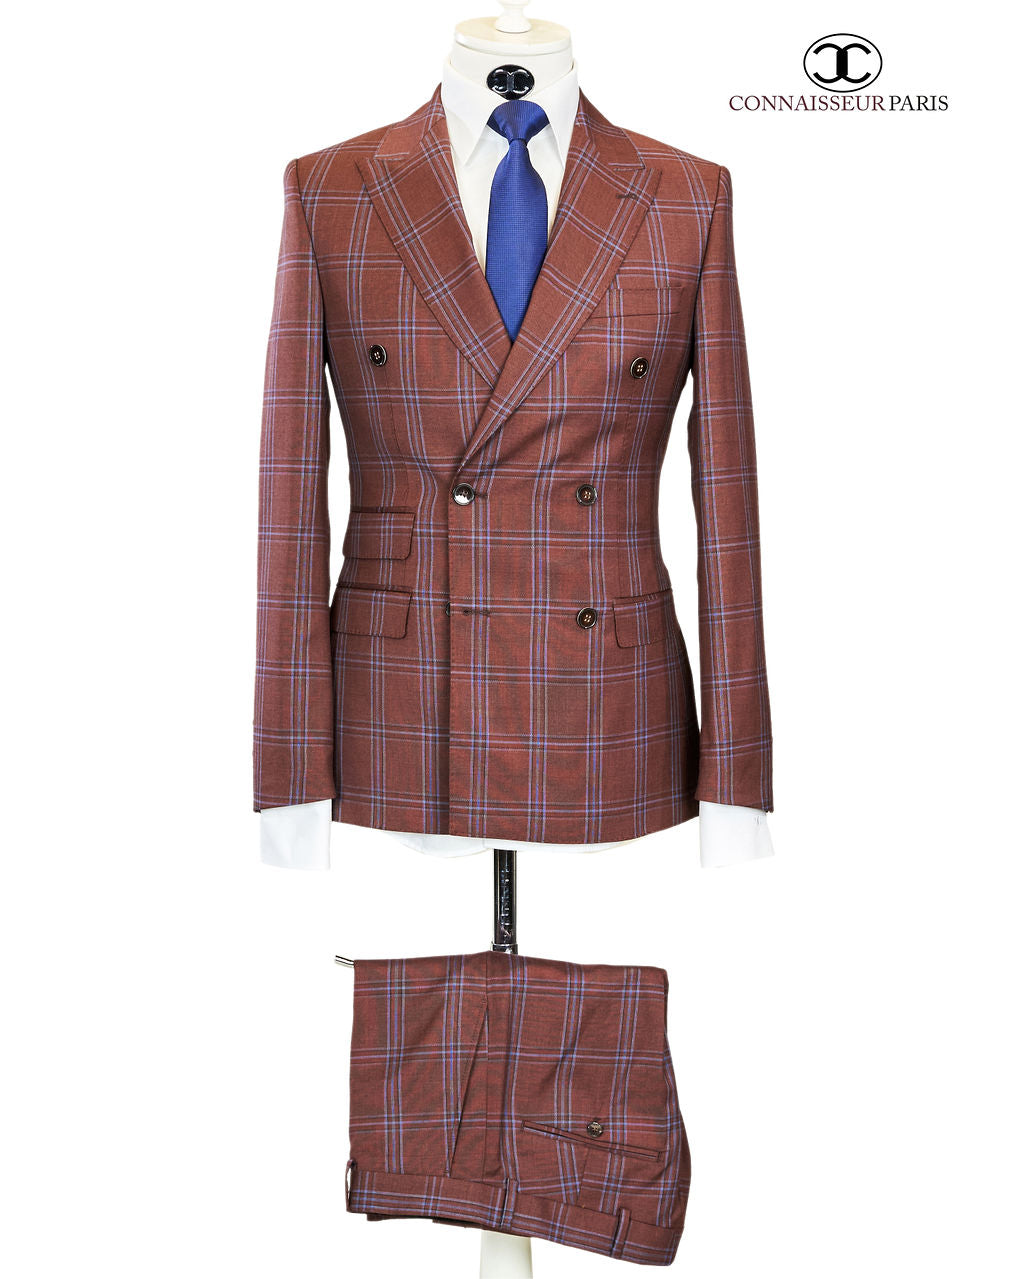 Cerutti - Dark brown with blue plaid double breasted 2-piece slim fit suit